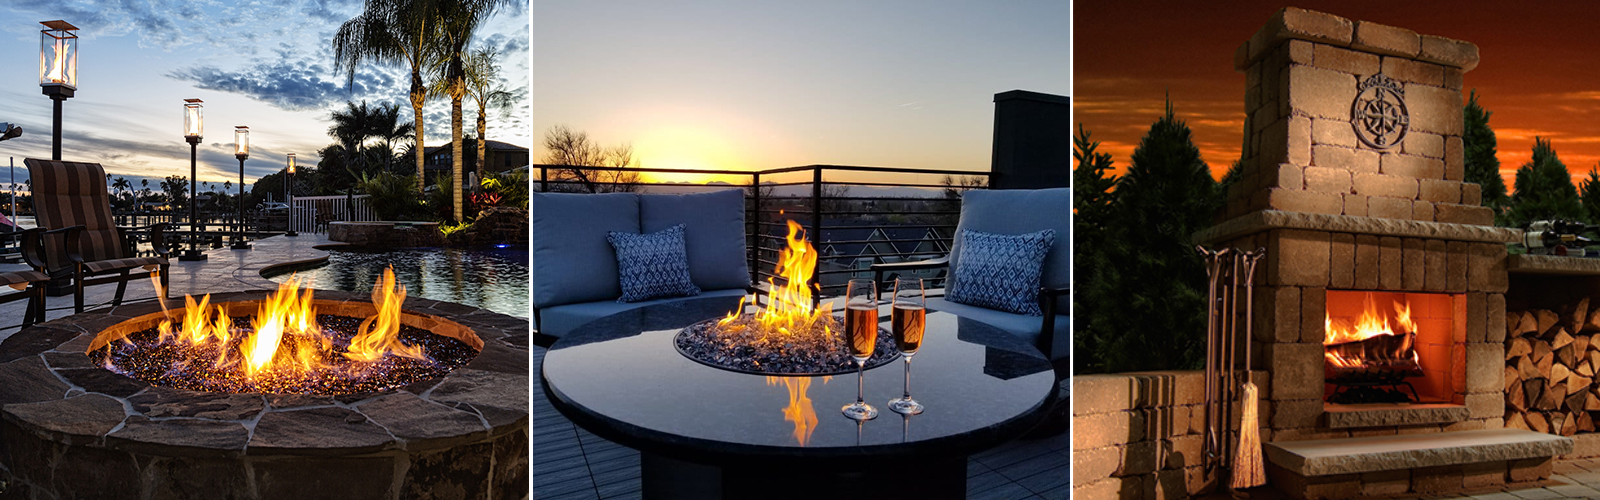 Outdoor Fire Pits, Outdoor Fire Tables, and Outdoor Fireplaces